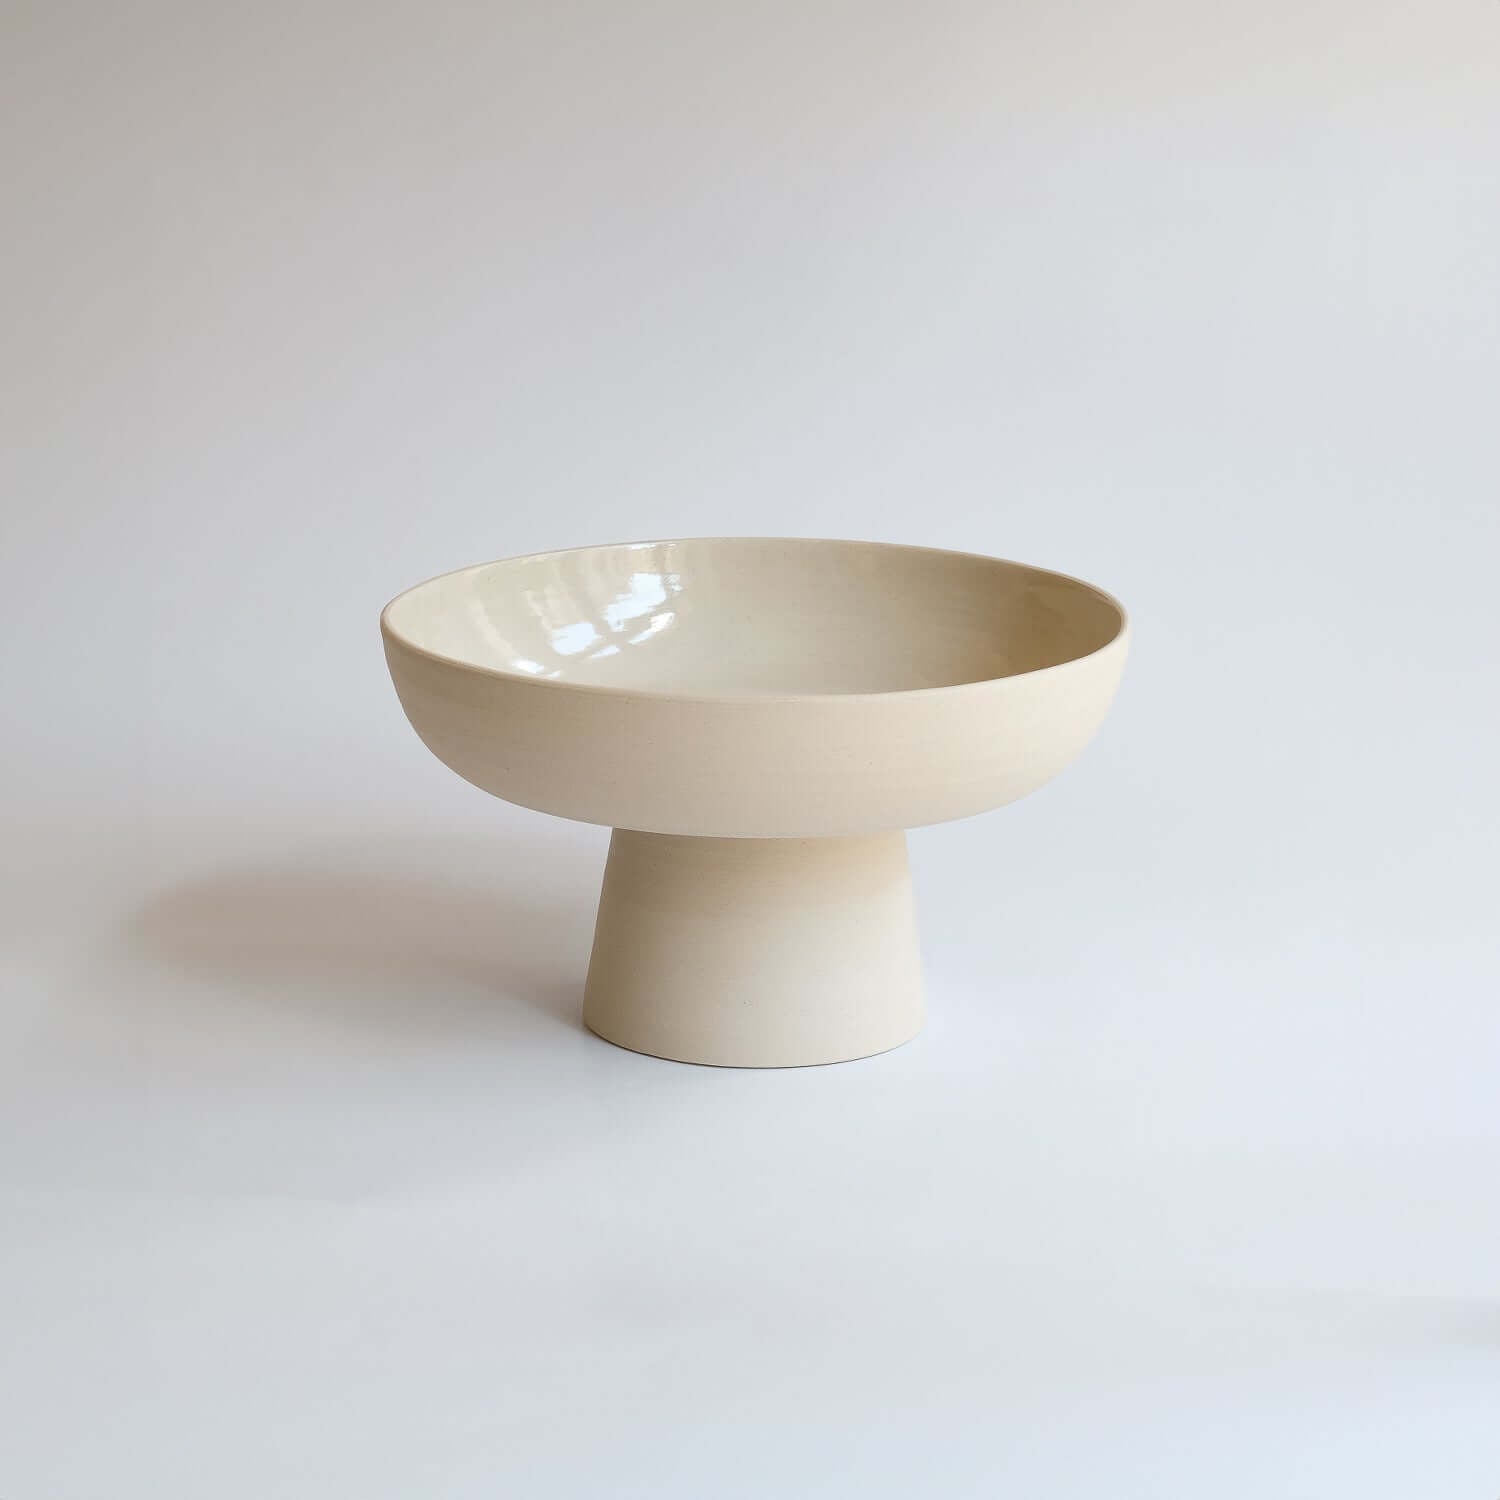 Unique Aleah Bowl, perfect as a decorative fruit bowl or vase for kenzan. Handcrafted, raw stoneware with glossy glaze, 15x20 cm. from viola beuscher ceramics